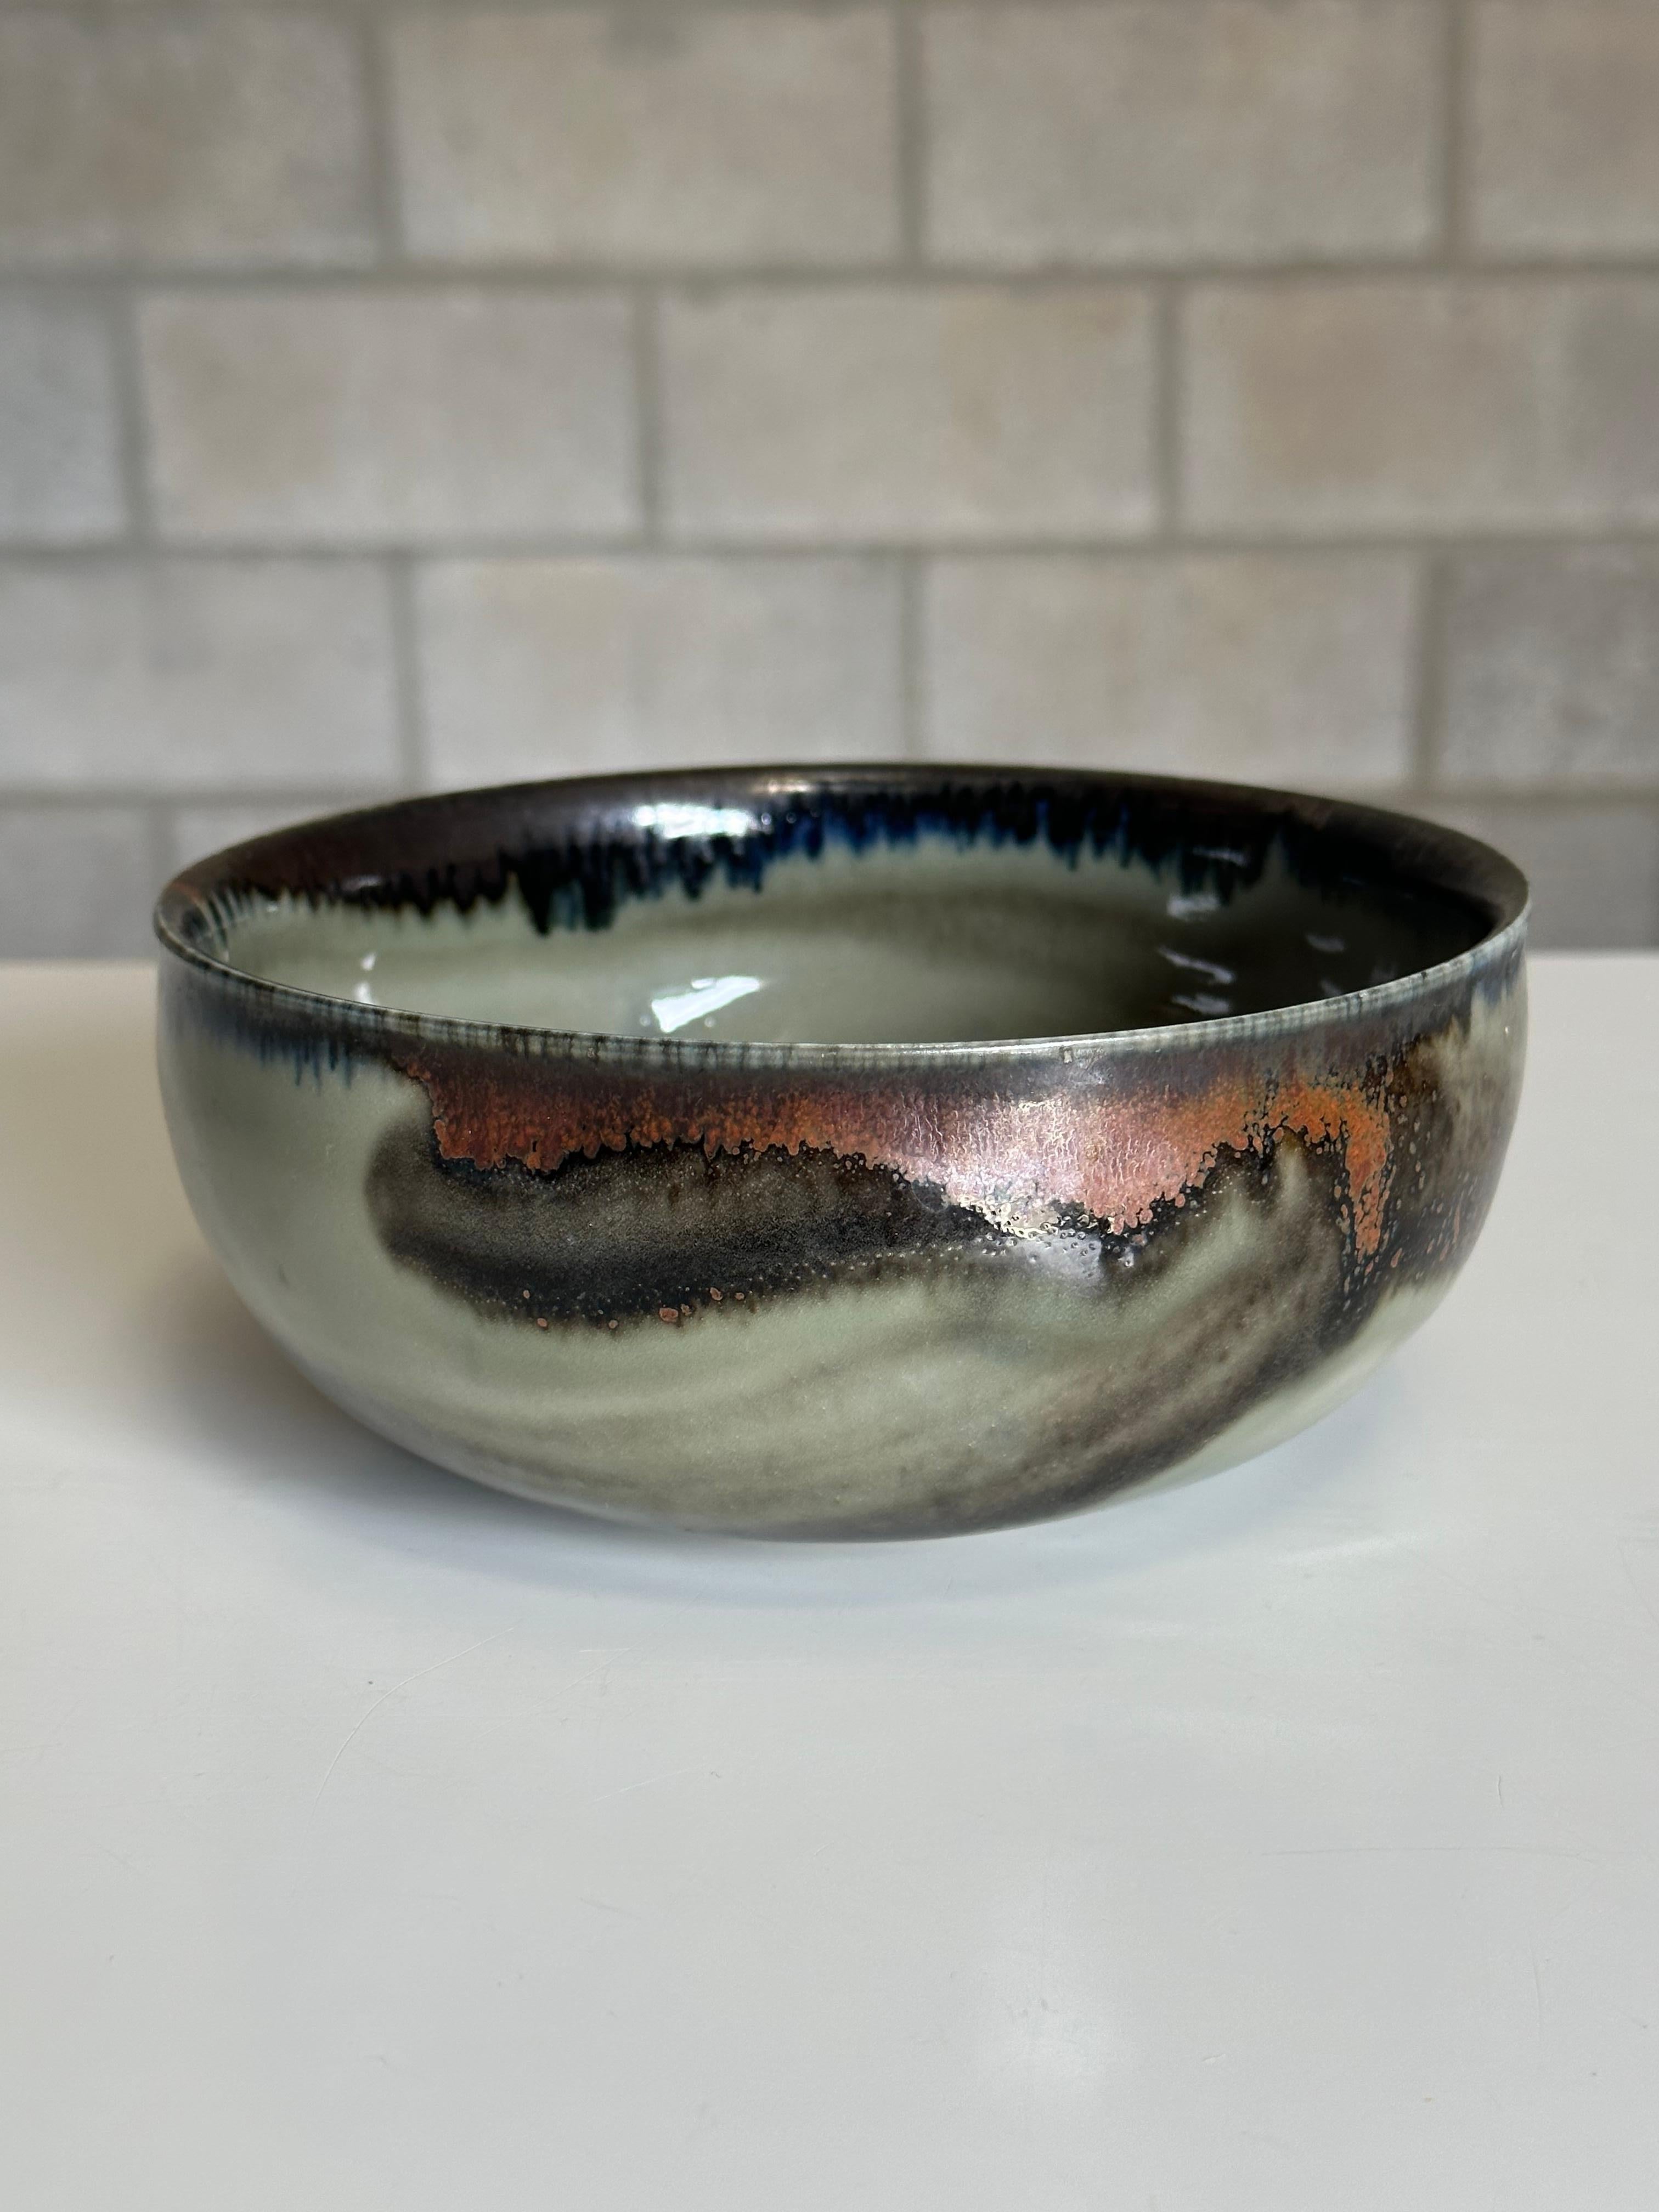 A unique bowl designed by Carl-Harry Stålhane for Rörstrand. Features an interesting green and black glaze with some areas having brown and gold tones present. Beautifully executed piece, and on the larger size vs most of his work